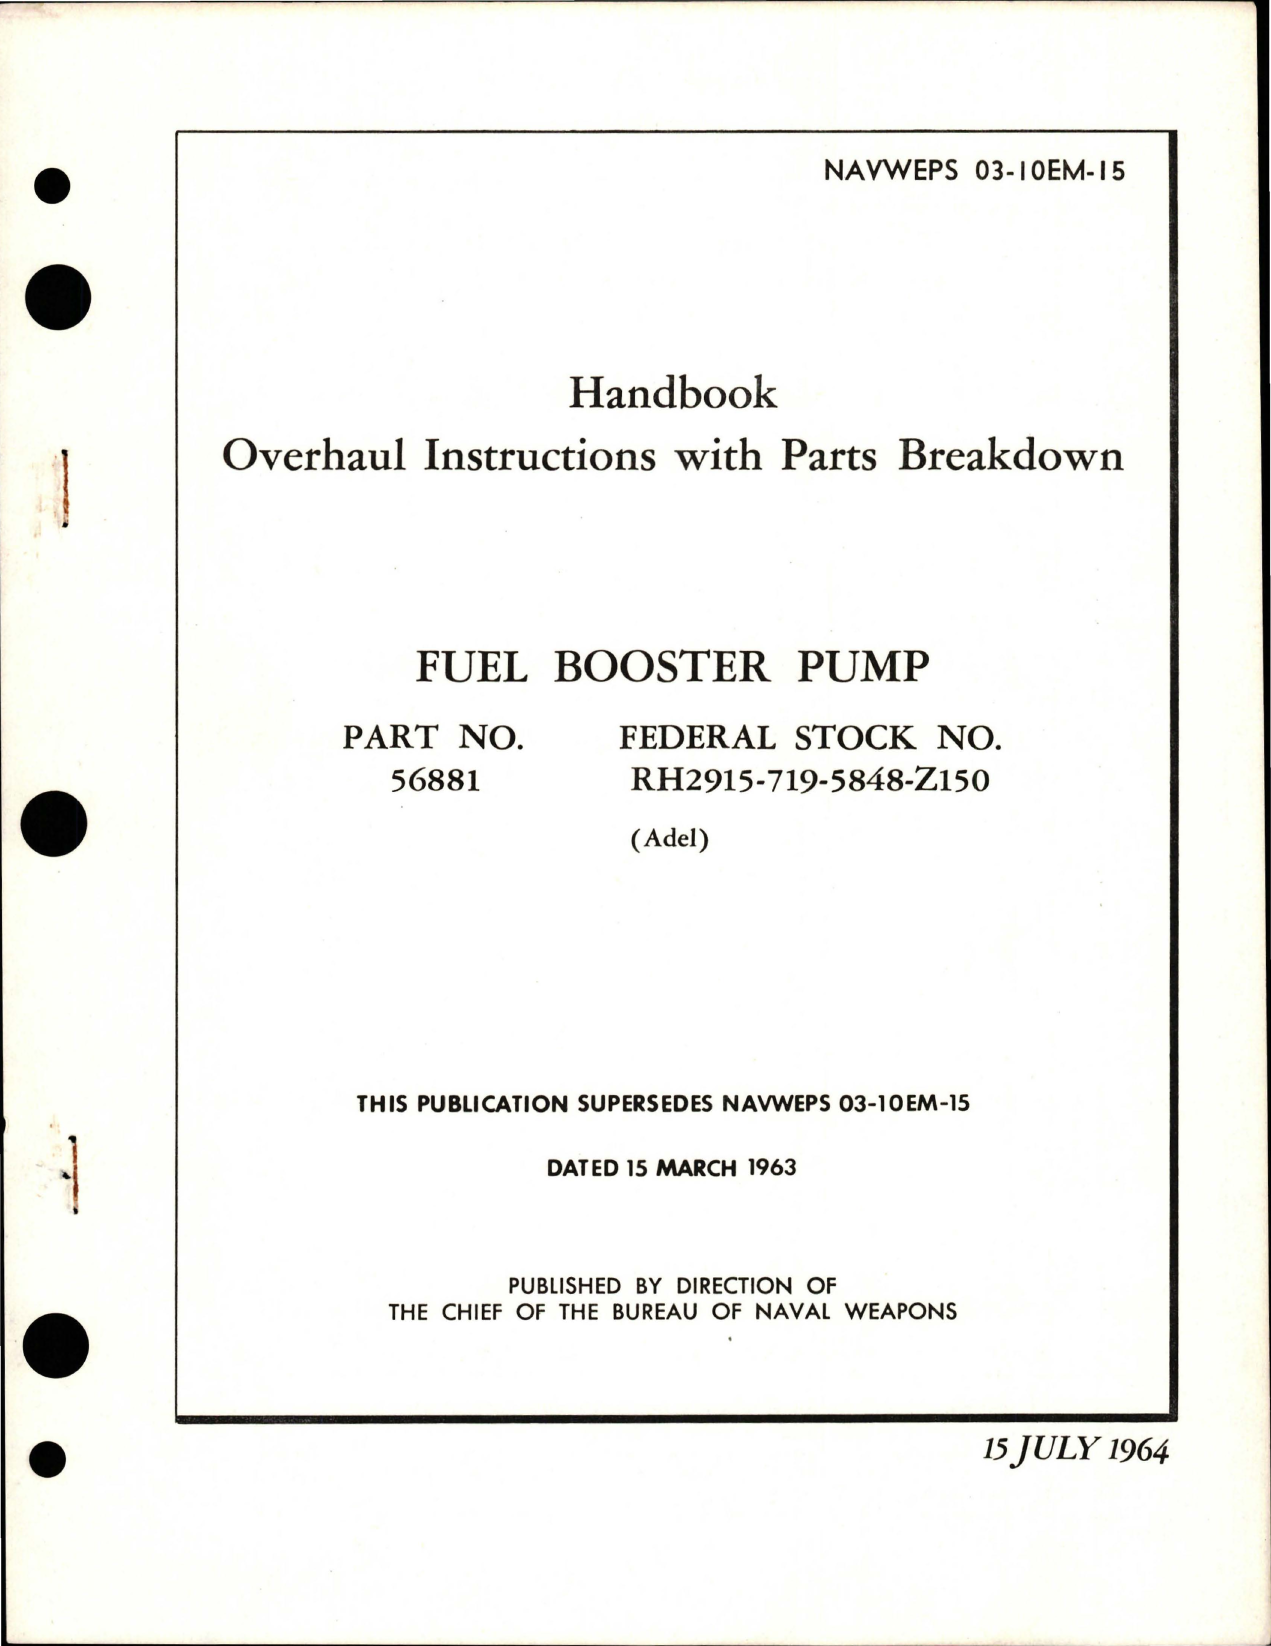 Sample page 1 from AirCorps Library document: Overhaul Instructions with Parts Breakdown for Fuel Booster Pump - Part 56881